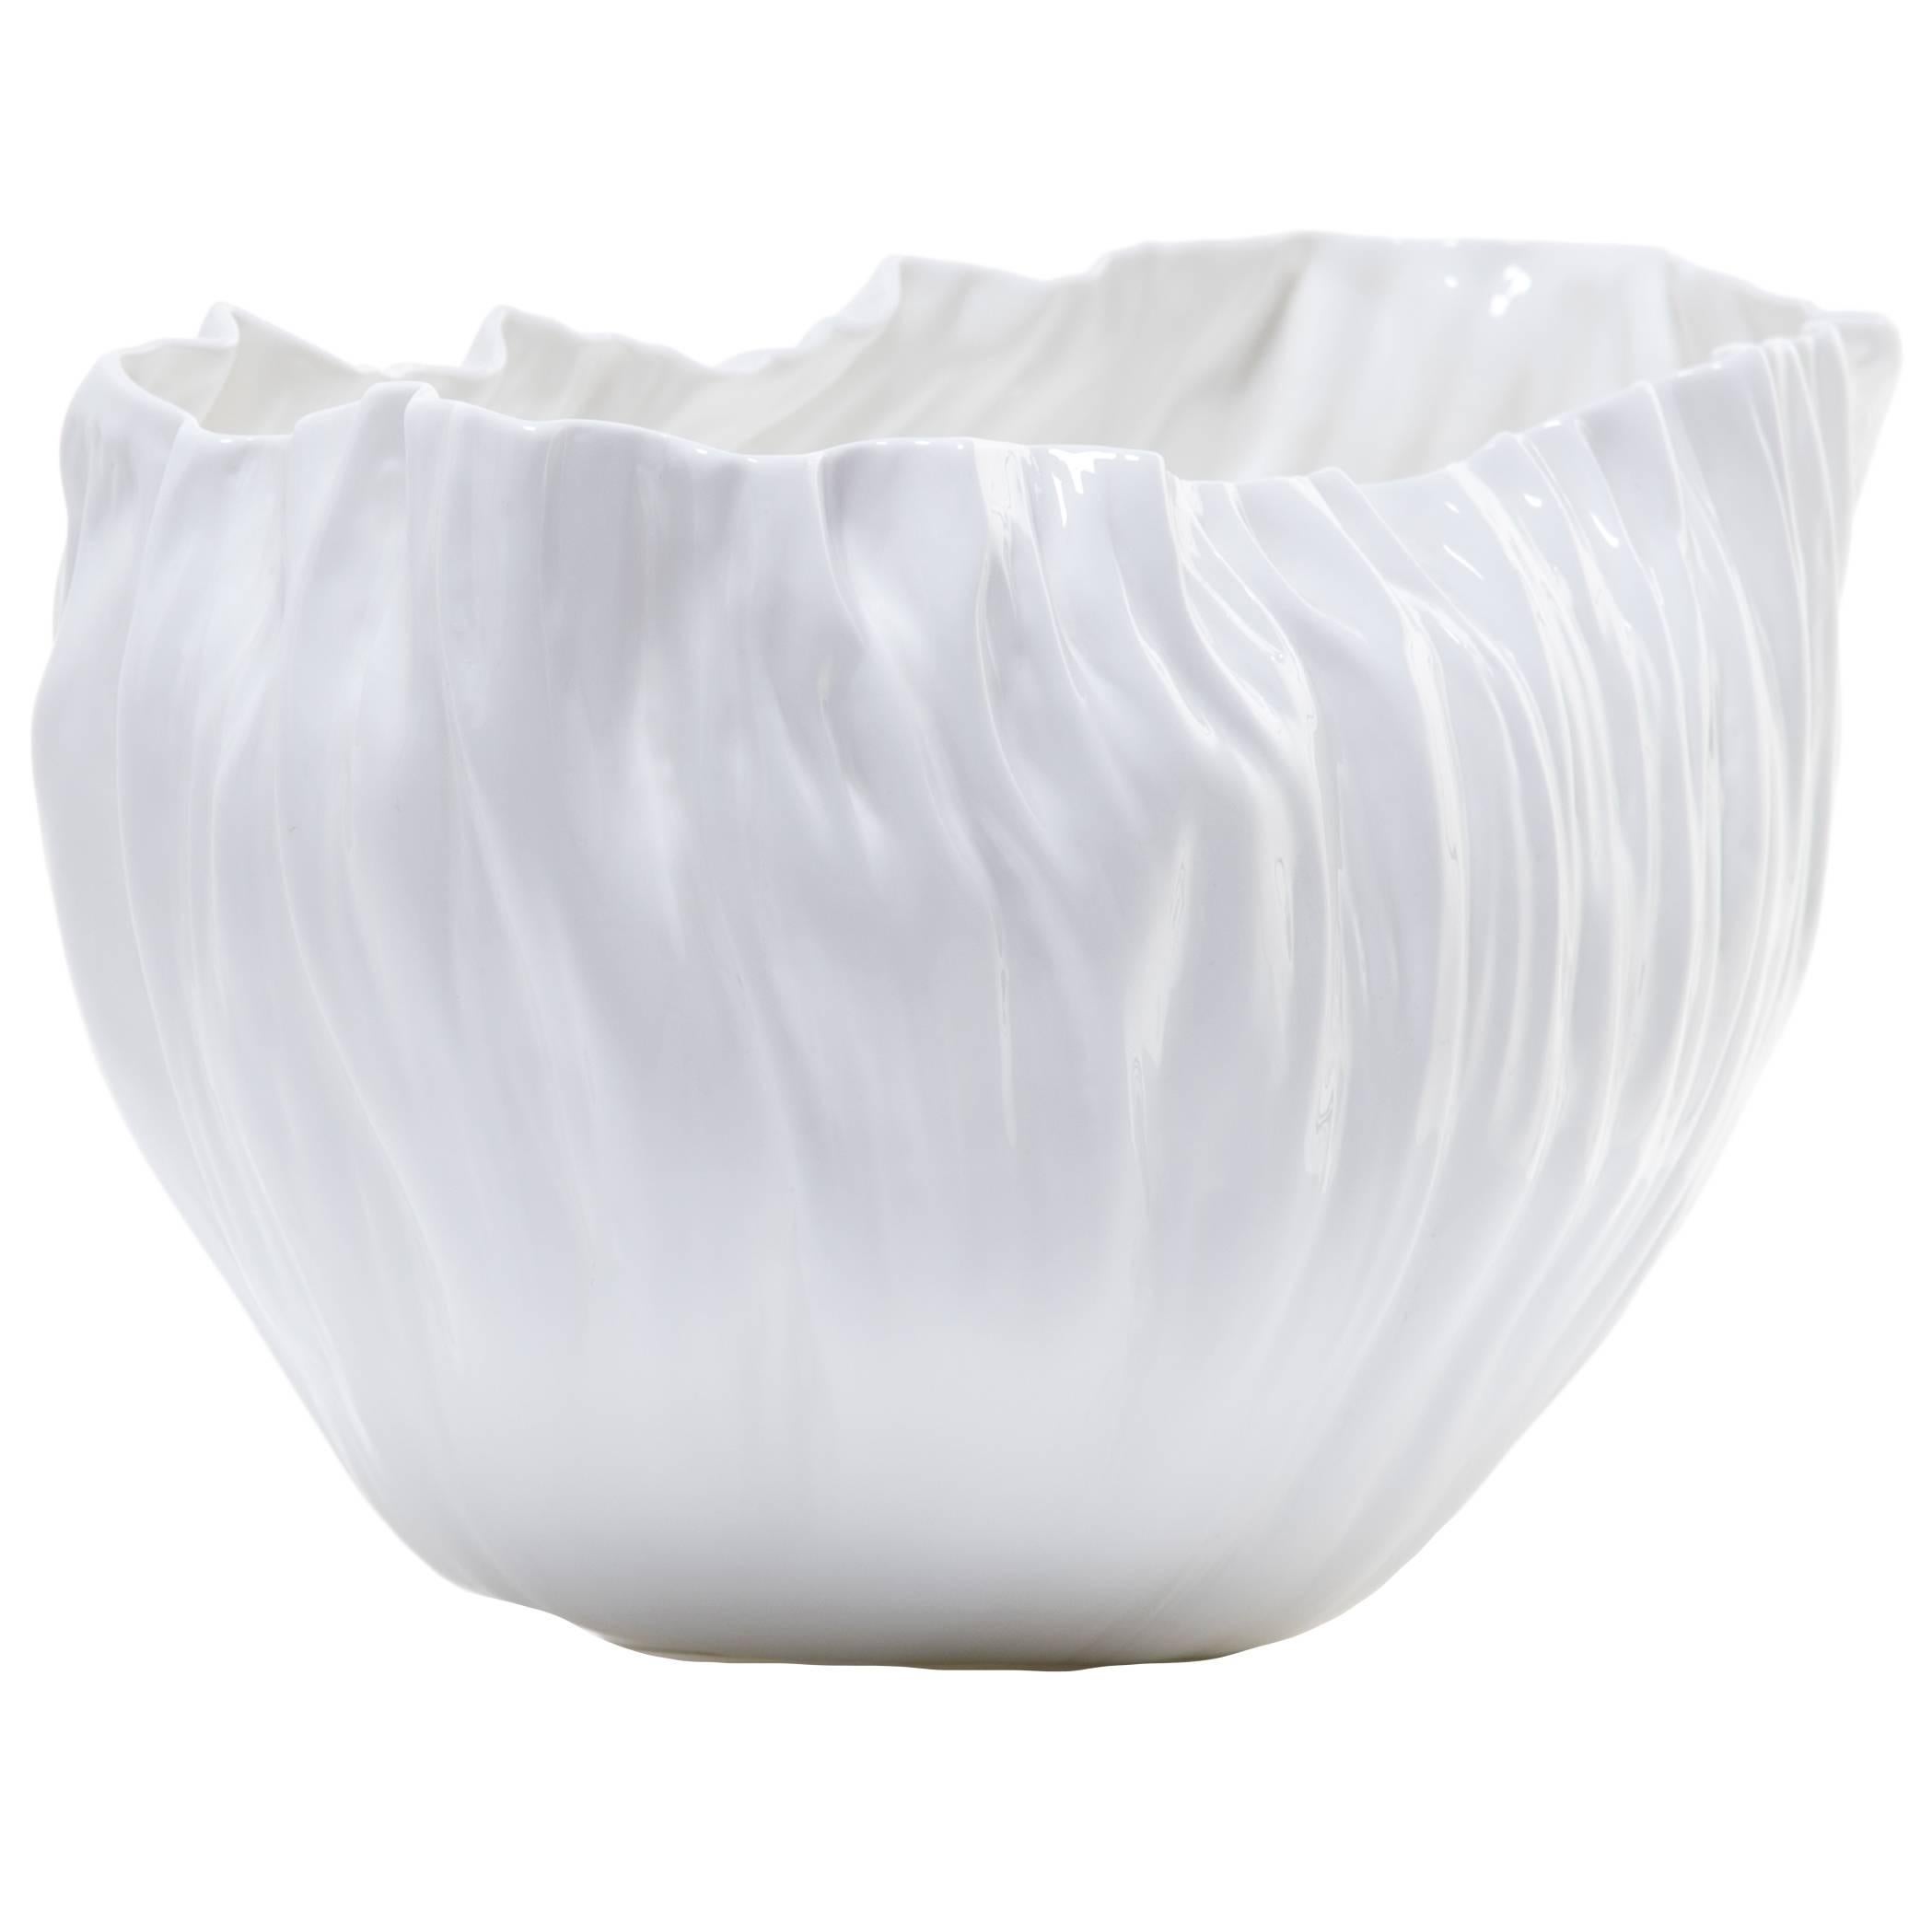 "Shui" Porcelain Bowl by Xie Dong